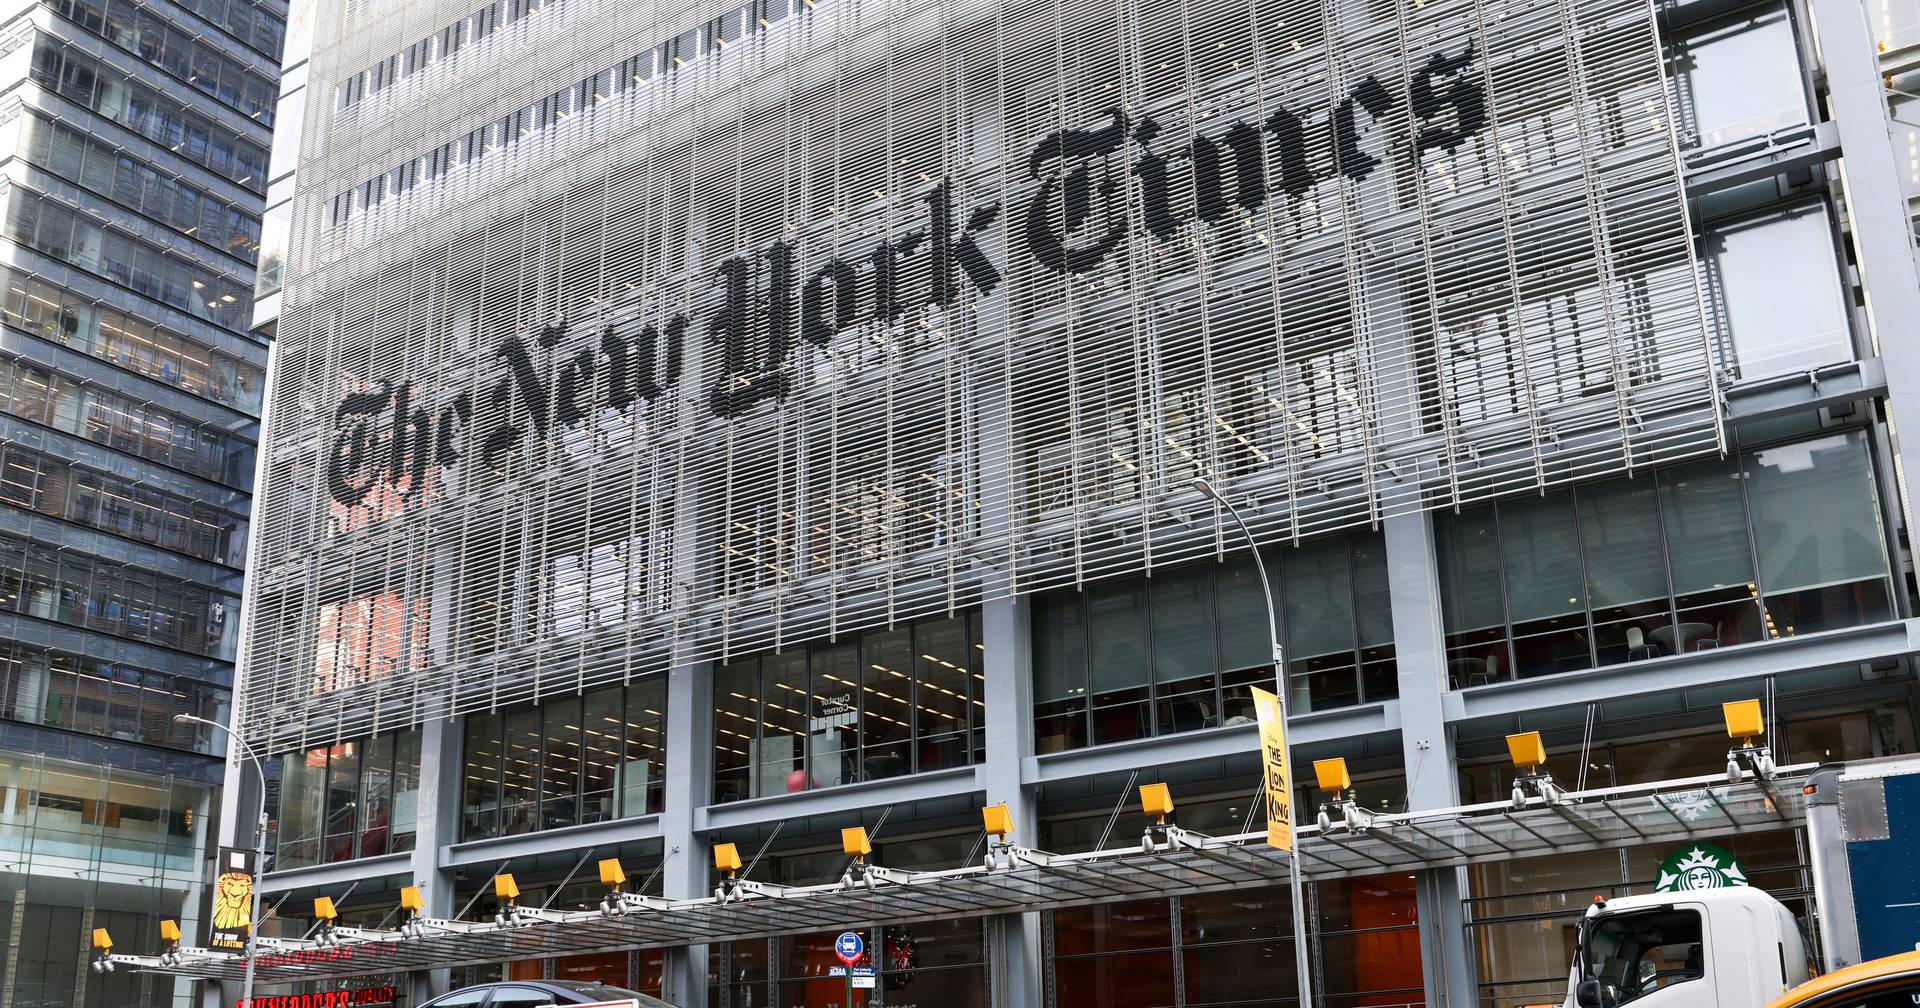 The New York Times is suing Microsoft and OpenAI for using text without permission